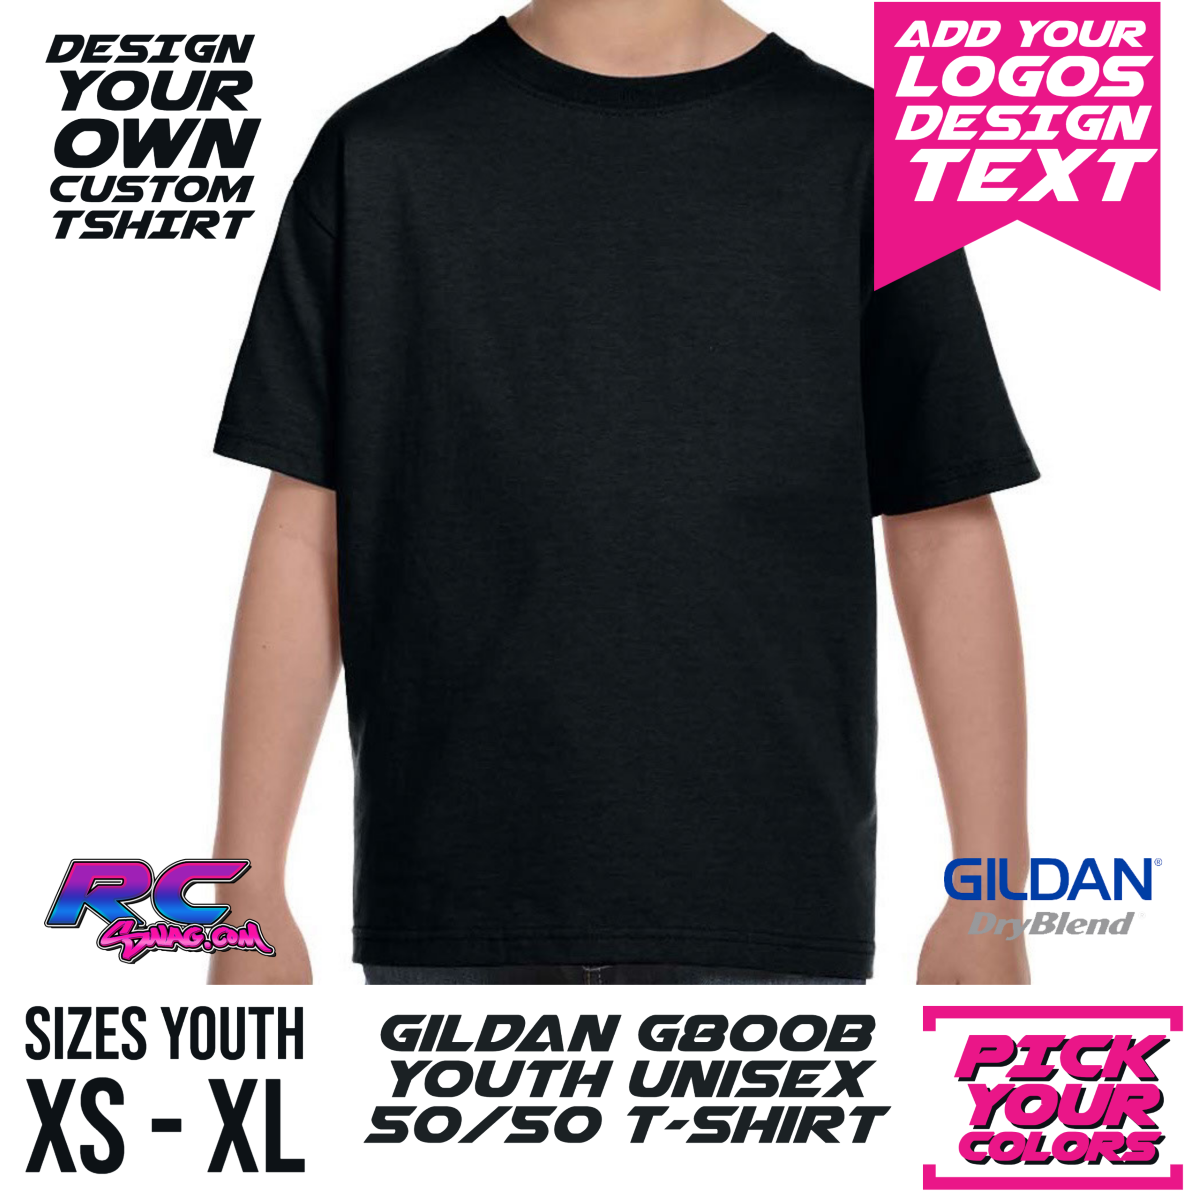 Design Your Own Custom - Youth T-Shirt G800B 50/50) - RC SWAG - Stickers, T-Shirts, Hoodies, RC Kits & More!